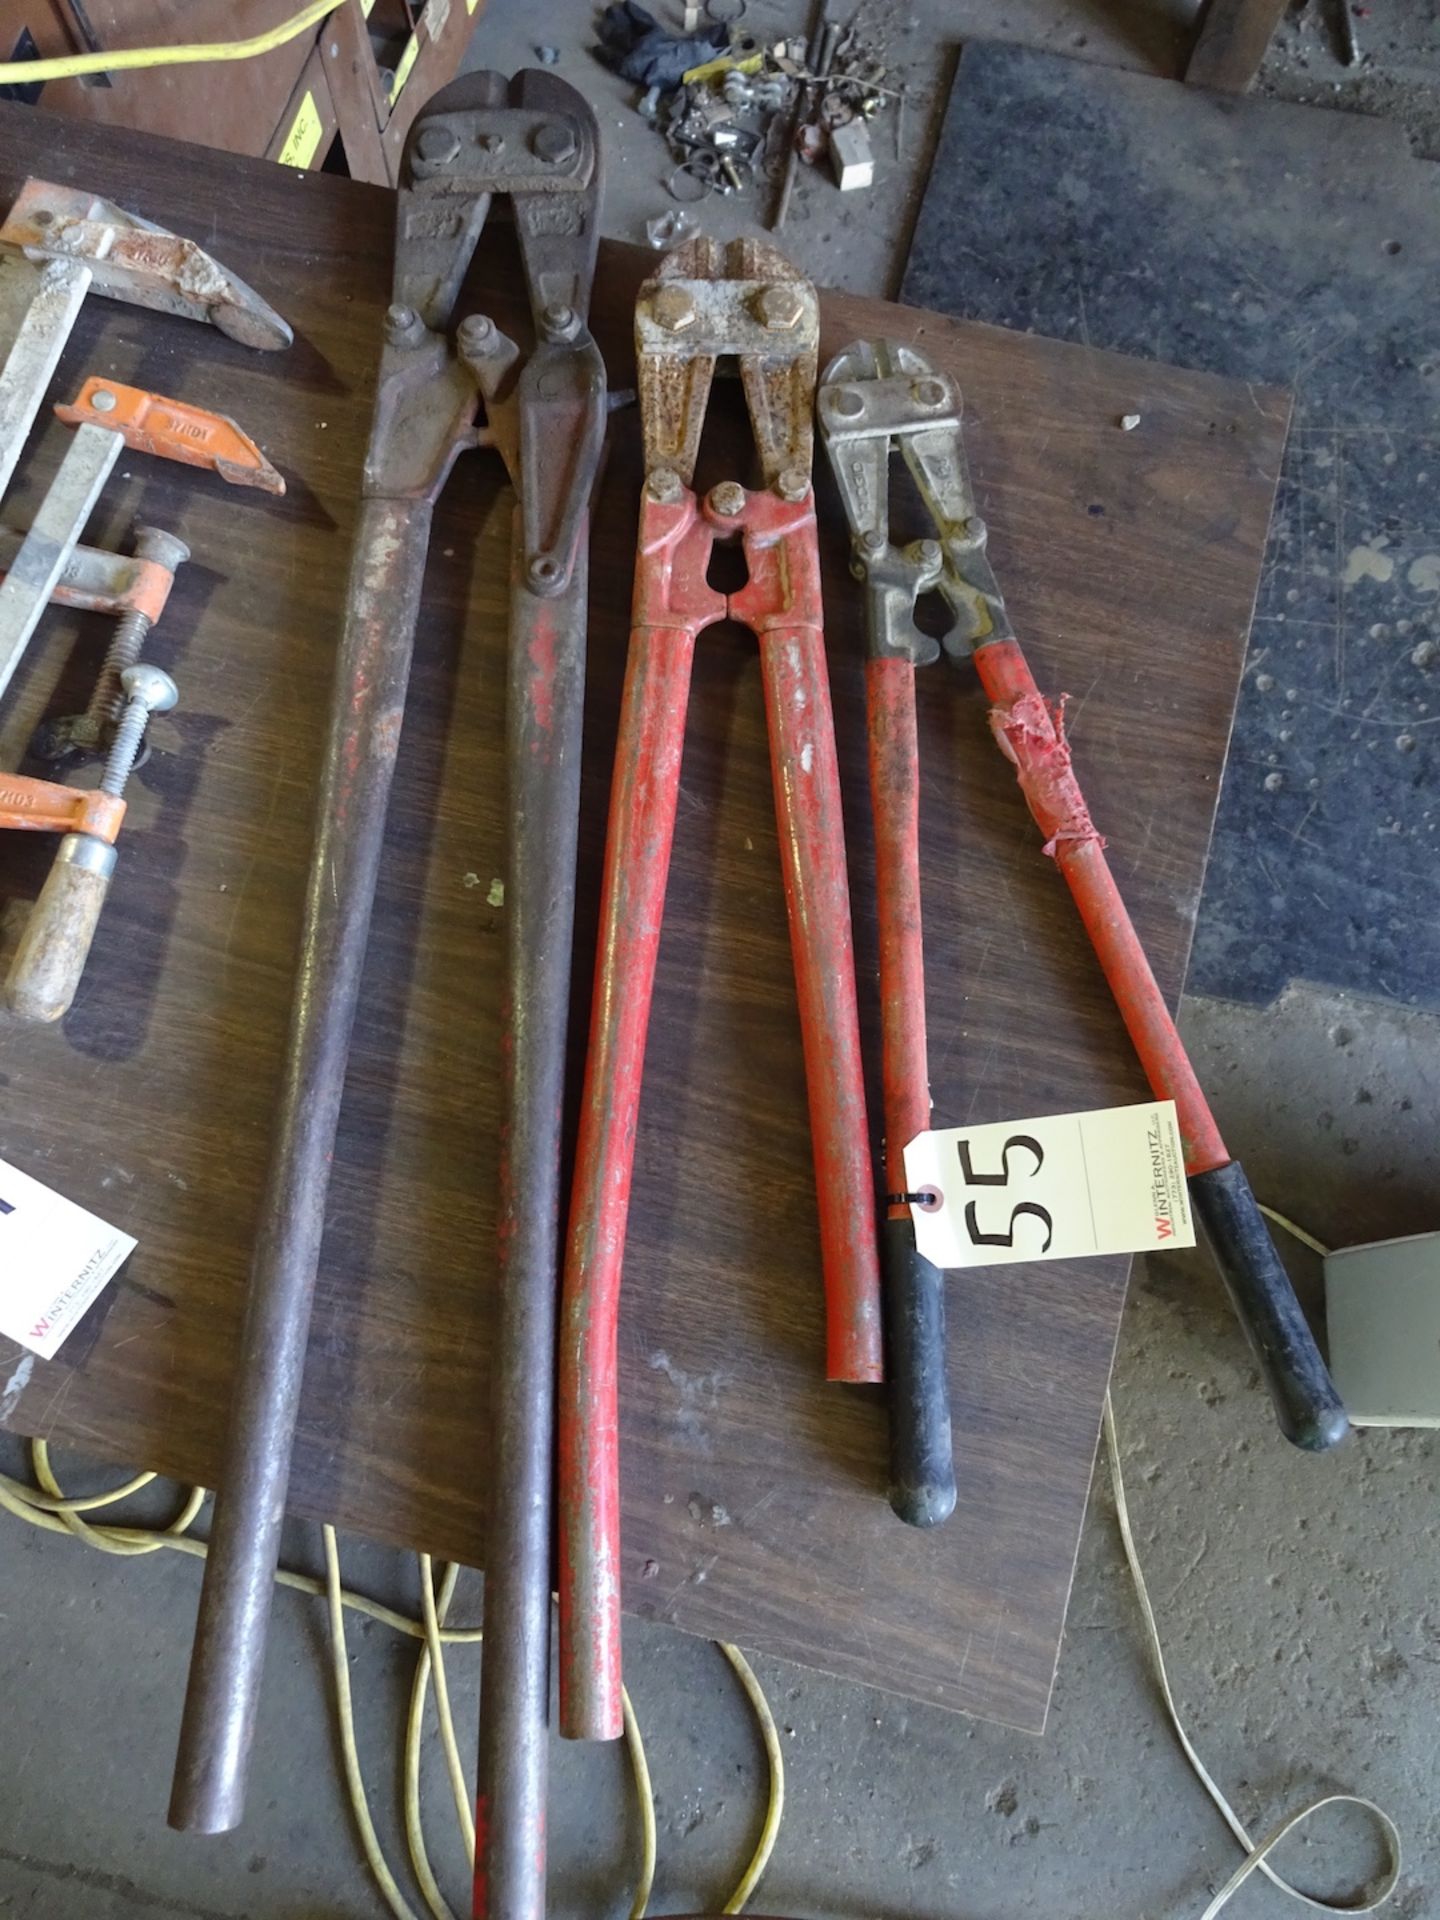 (3) LARGE BOLT CUTTERS, 24", 30" AND 36"